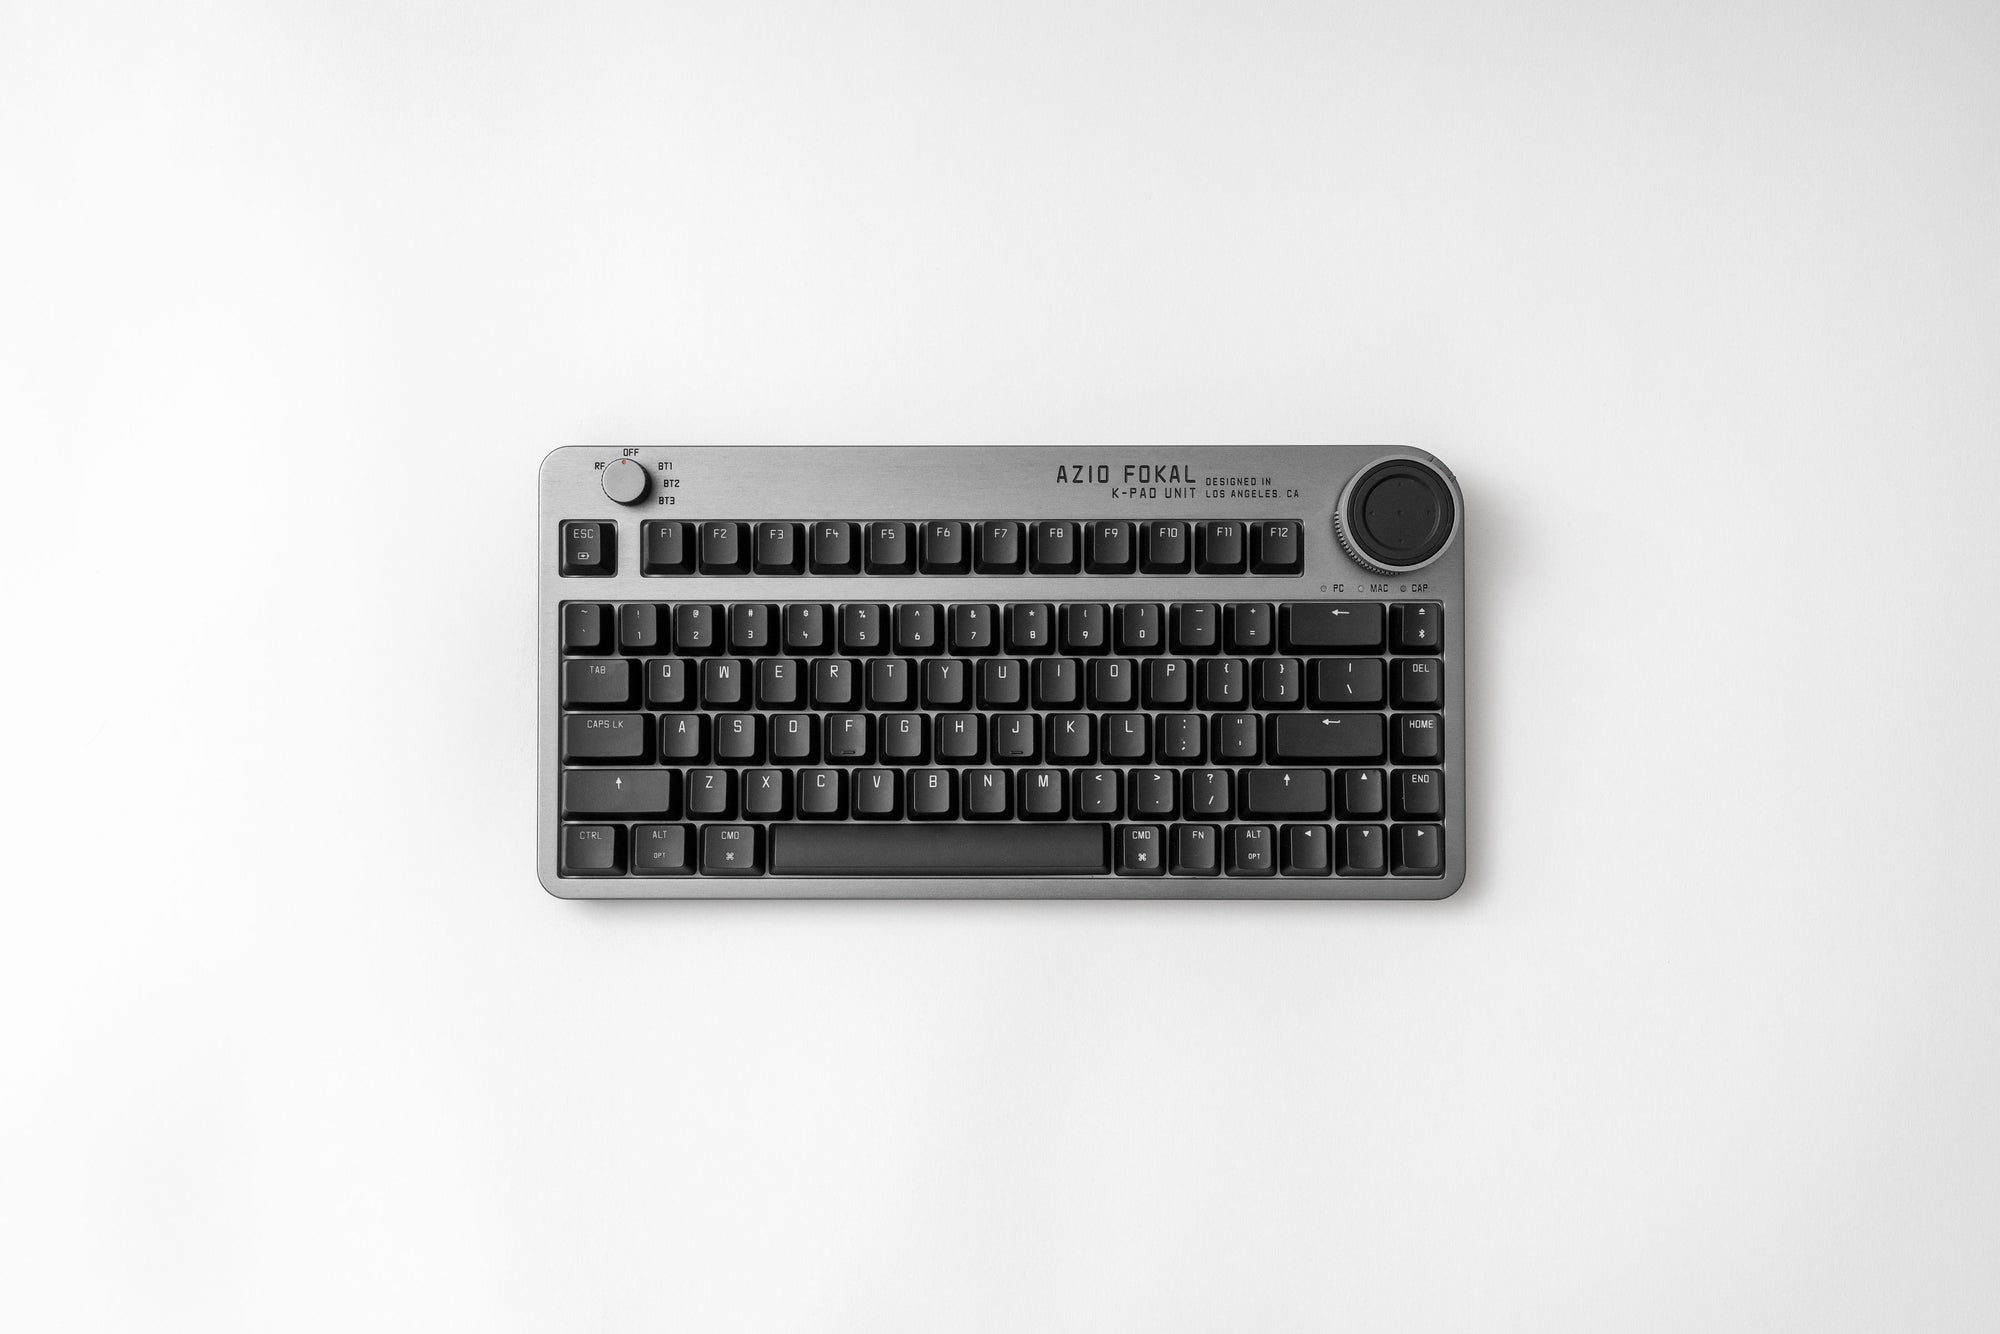 Press Release: Azio officially launches the Fokal Keyboard on Indiegogo